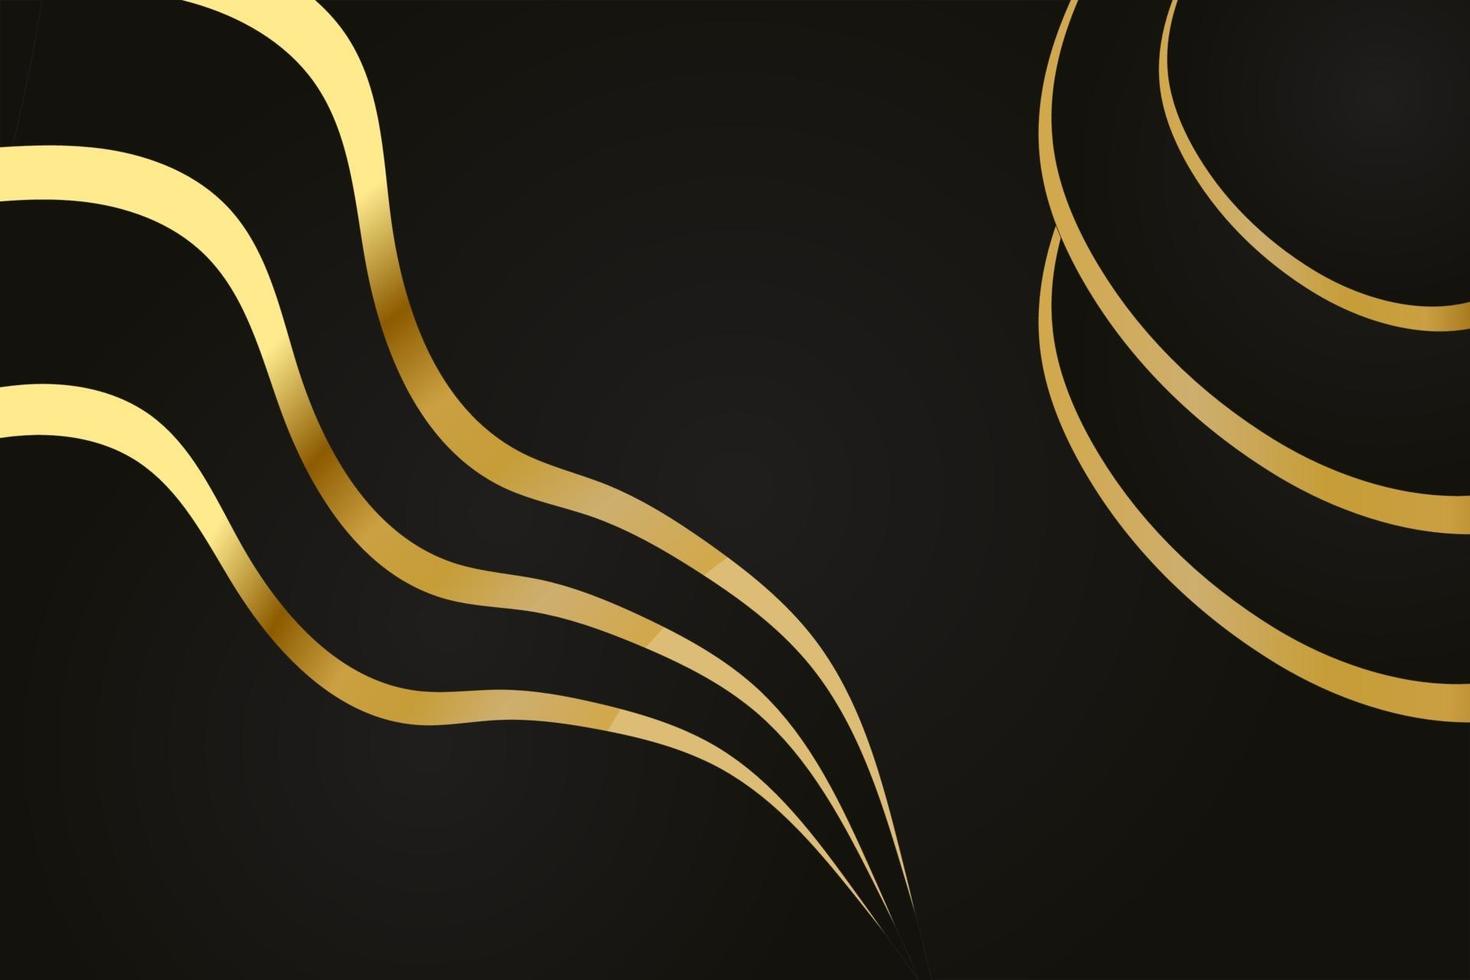 Modern black luxury background with golden line and shiny golden light. vector